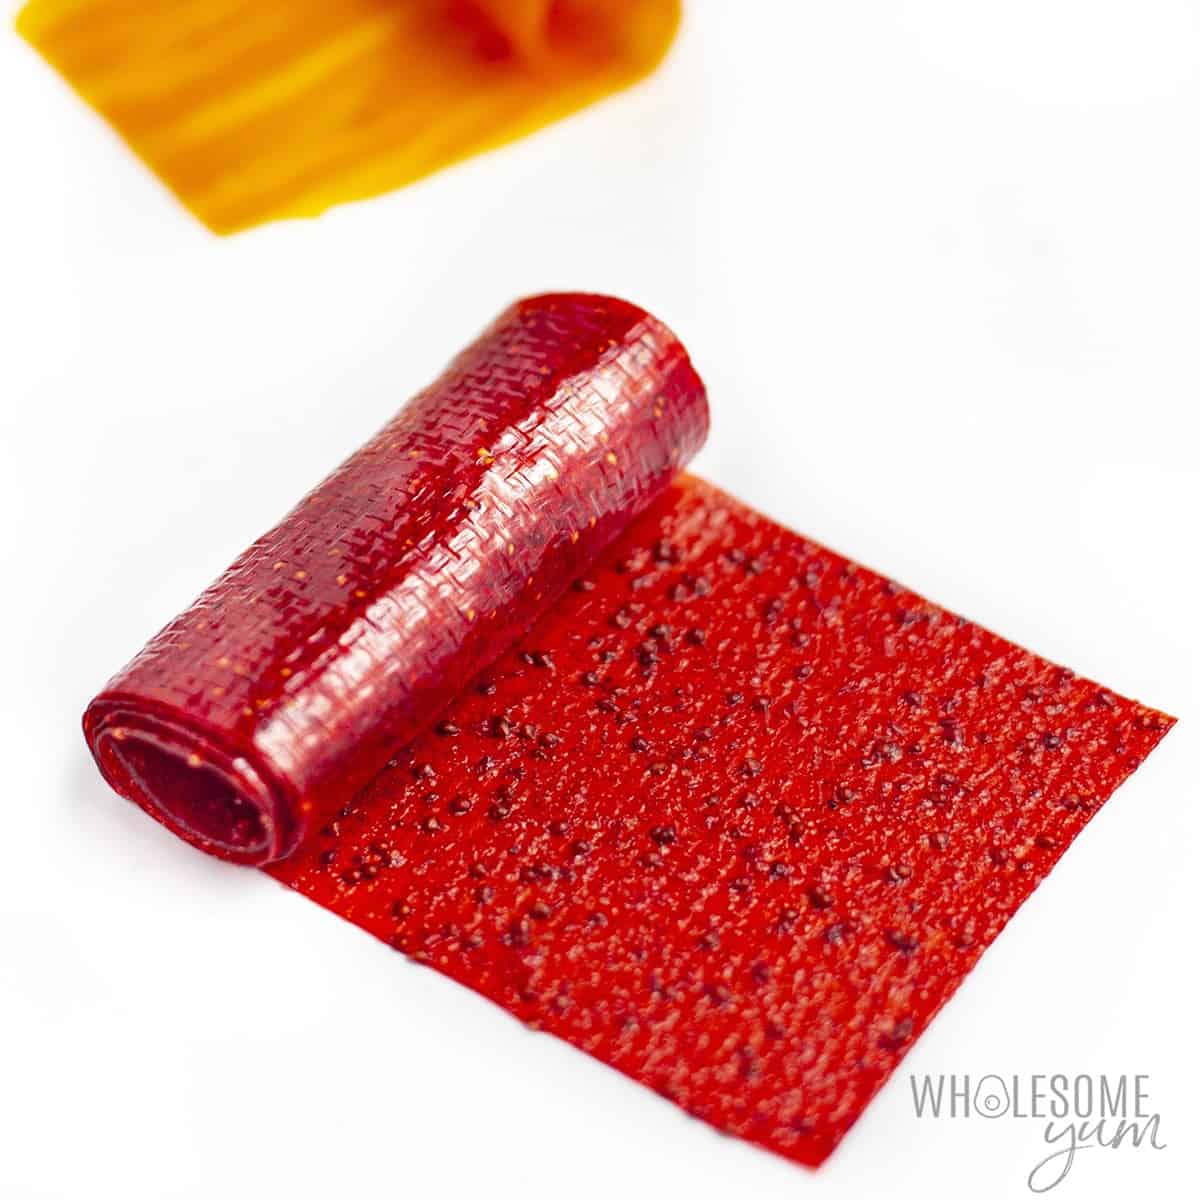 Unrolled fruit leather.